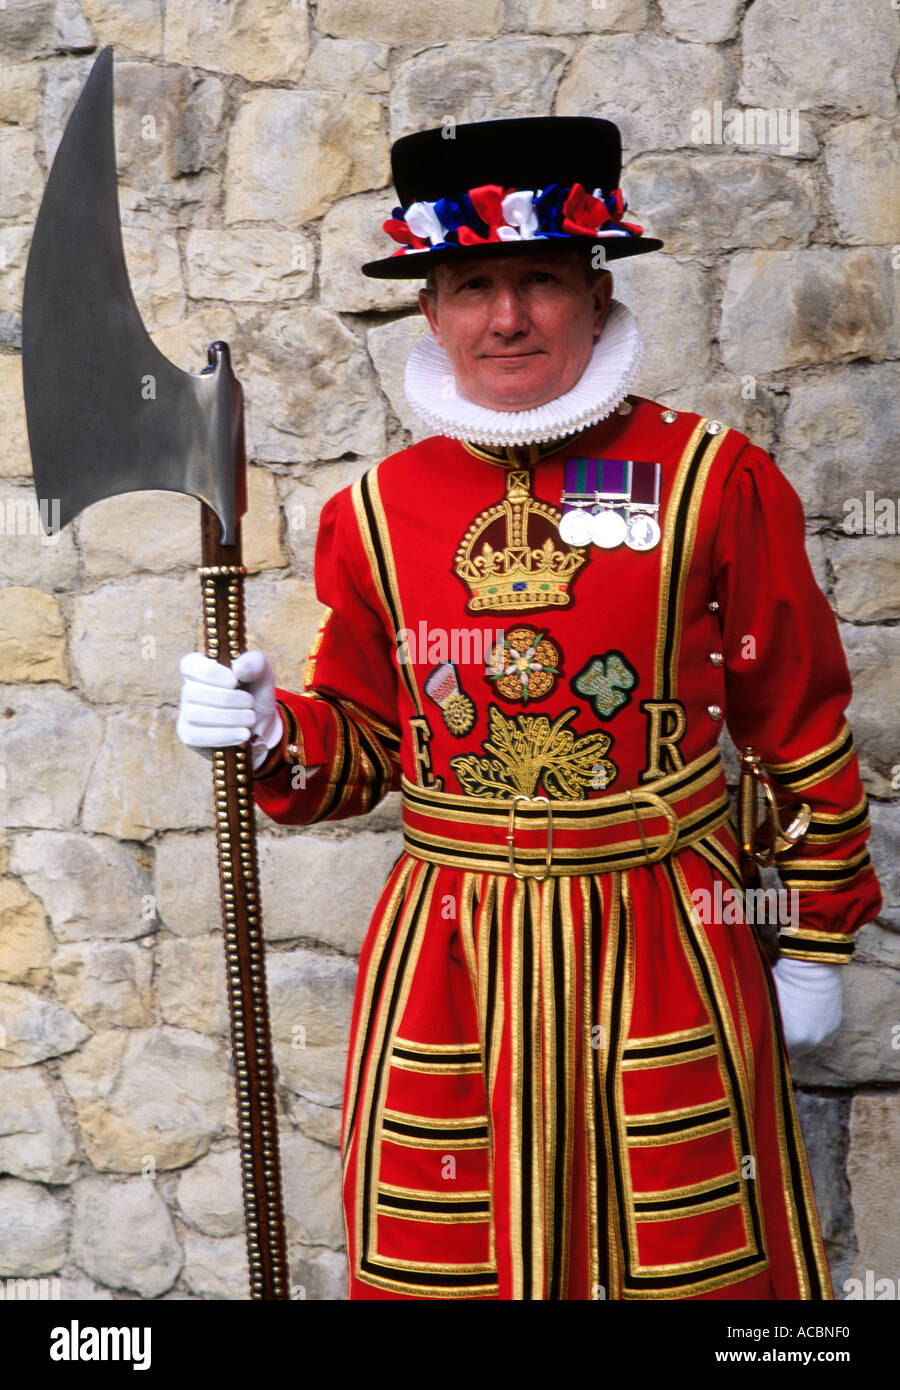 Beefeater Tower of London England UK Yeoman Warder costume history heritage  travel tourism beefeaters warders ceremony Stock Photo - Alamy